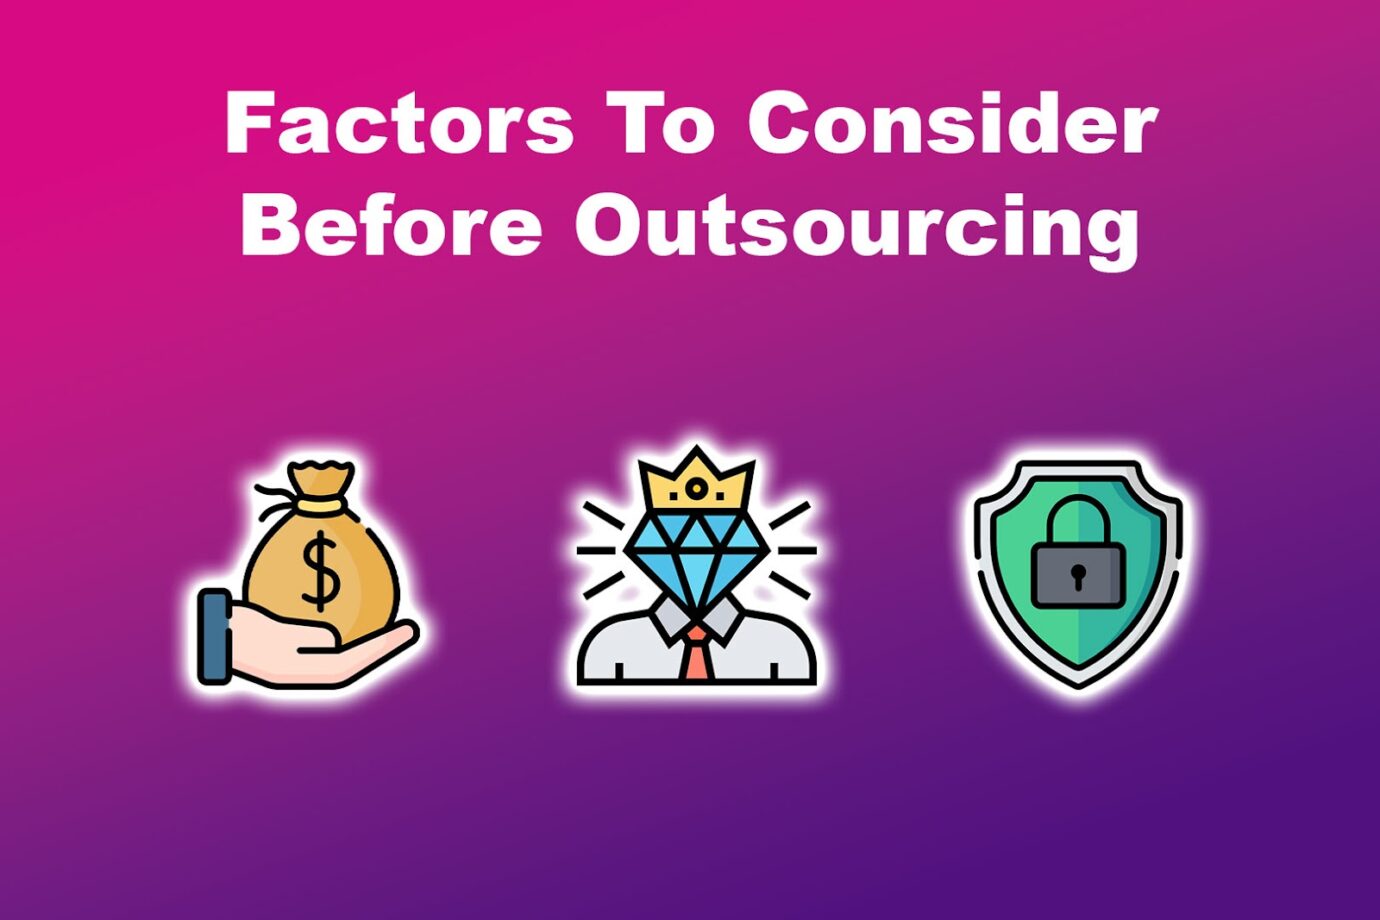 Four Factors To Consider Before Outsourcing